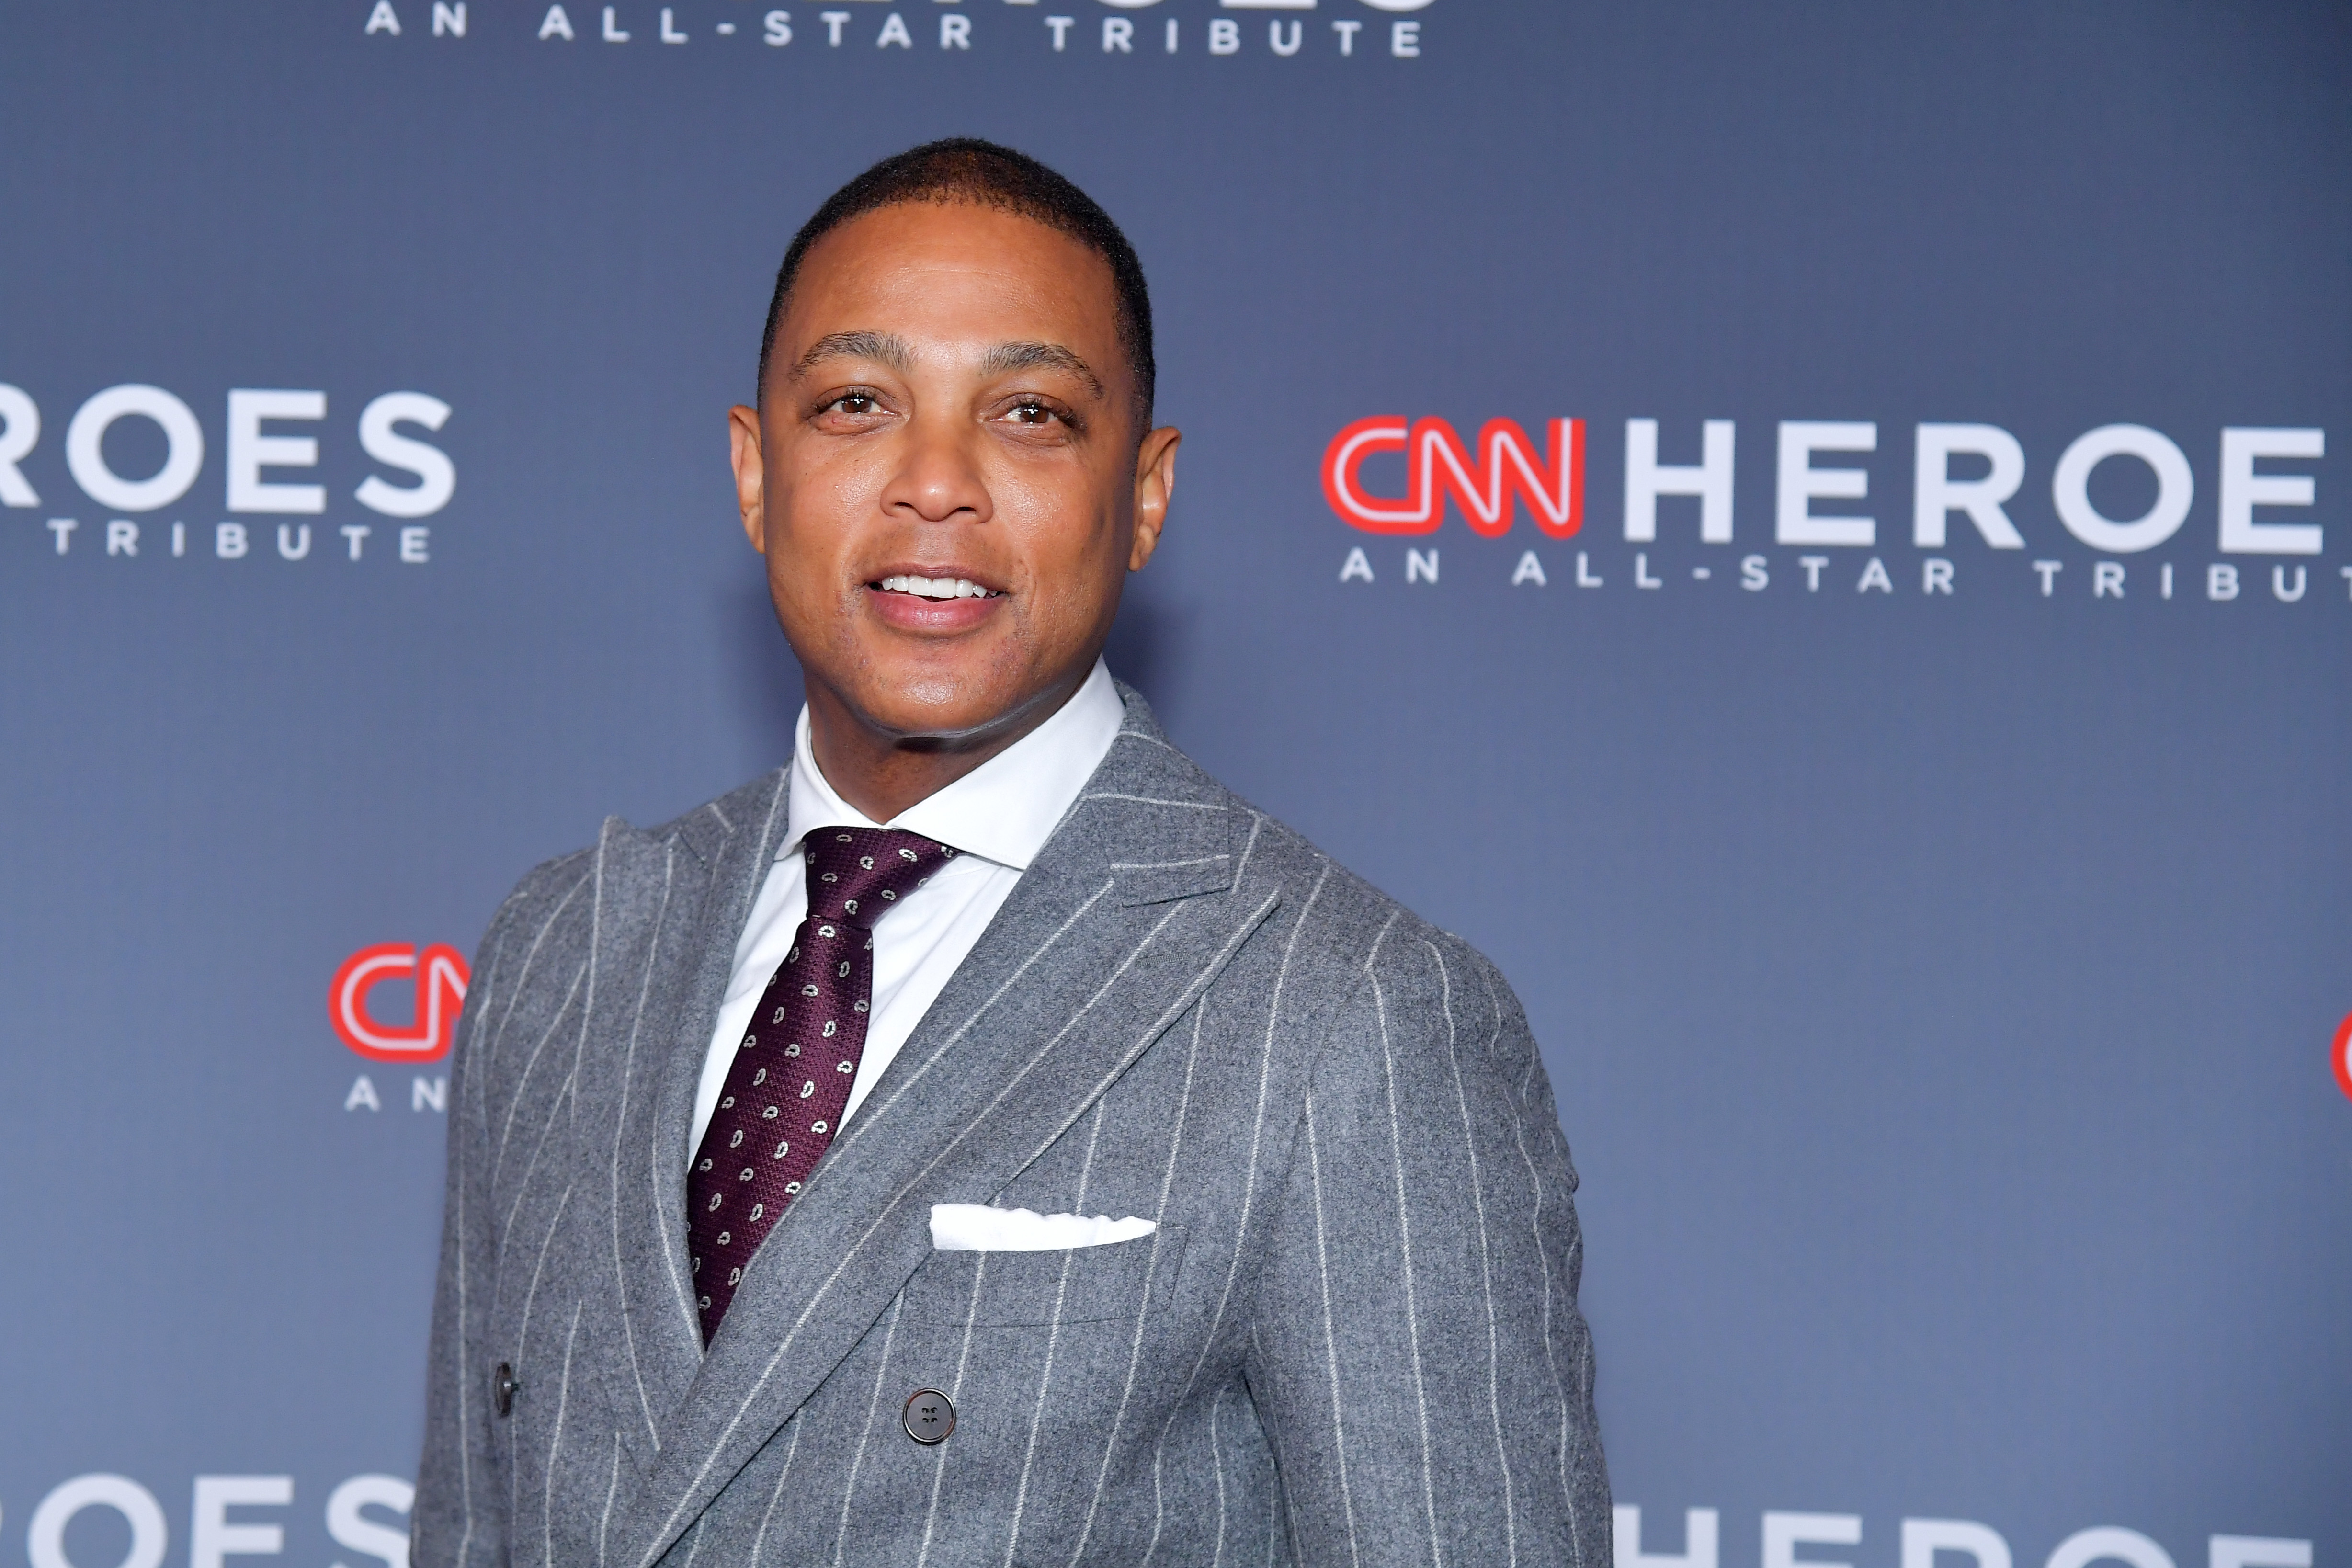 Wendy Williams Show Returns With Don Lemon As Host